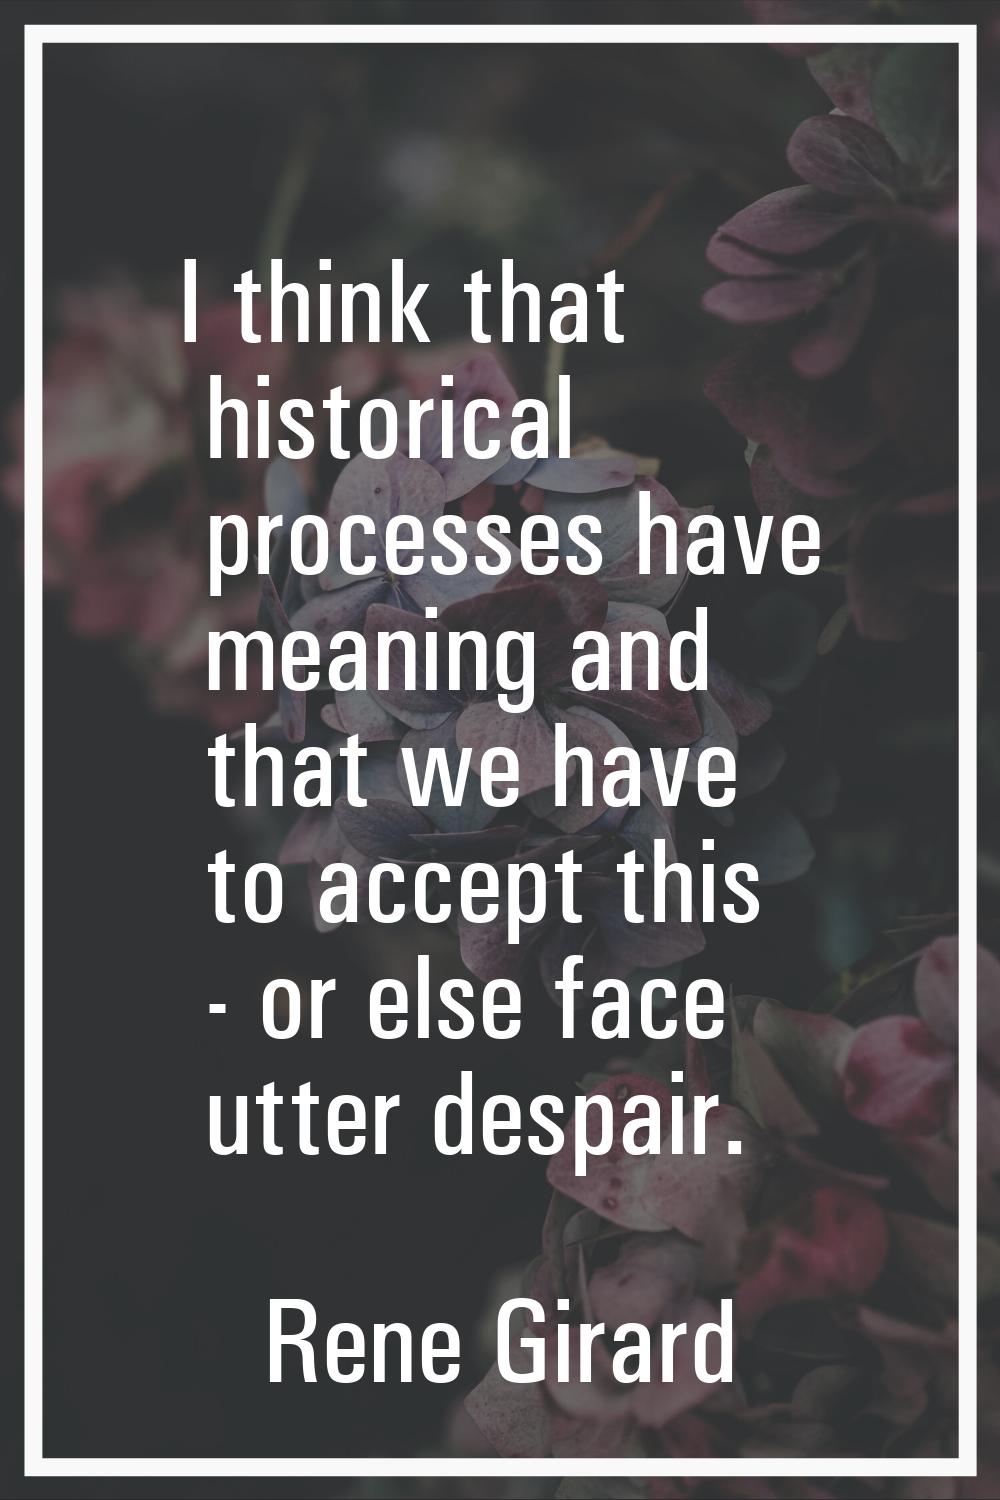 I think that historical processes have meaning and that we have to accept this - or else face utter